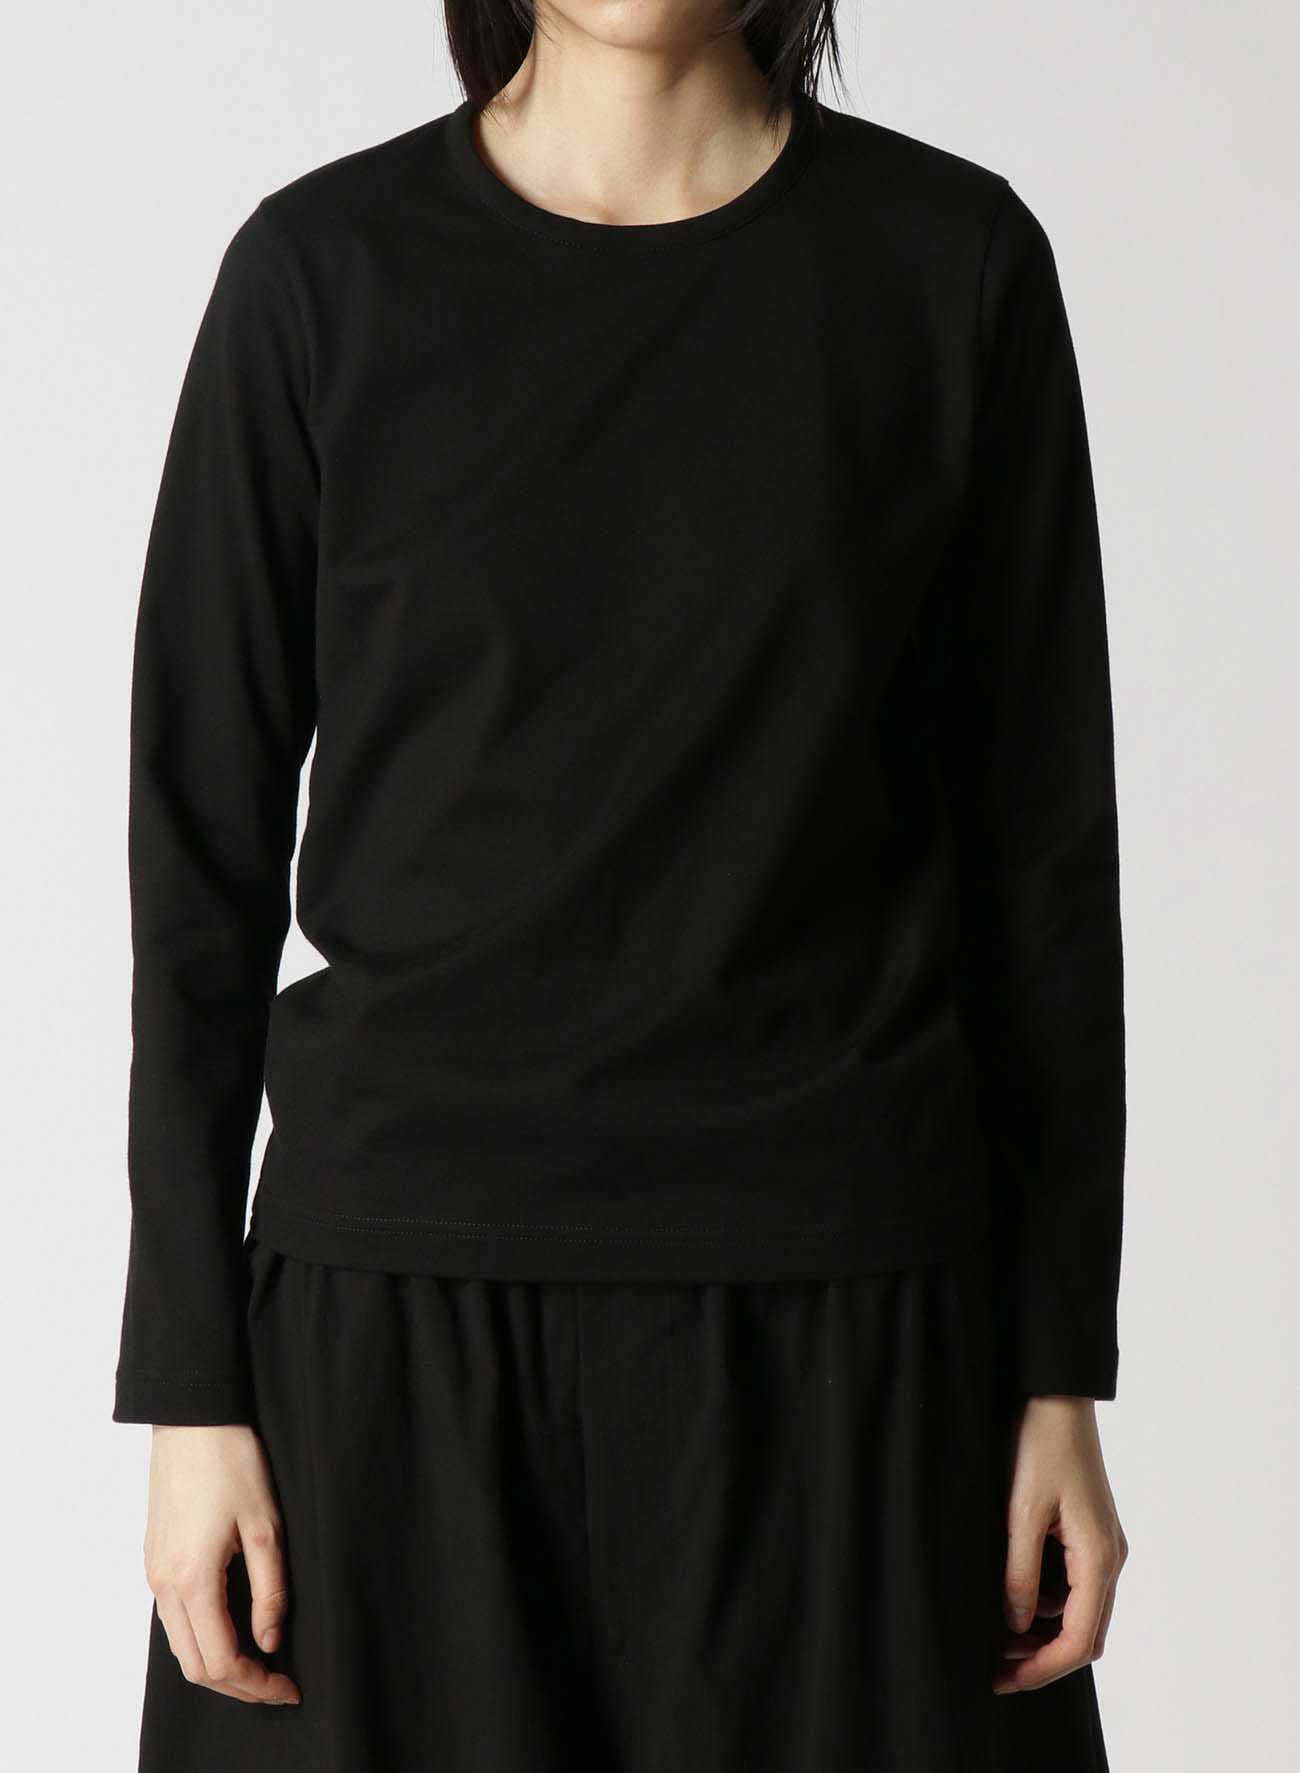 PIGMENT PRINT CORD EMBROIDERY ROUND NECK LONG SLEEVE